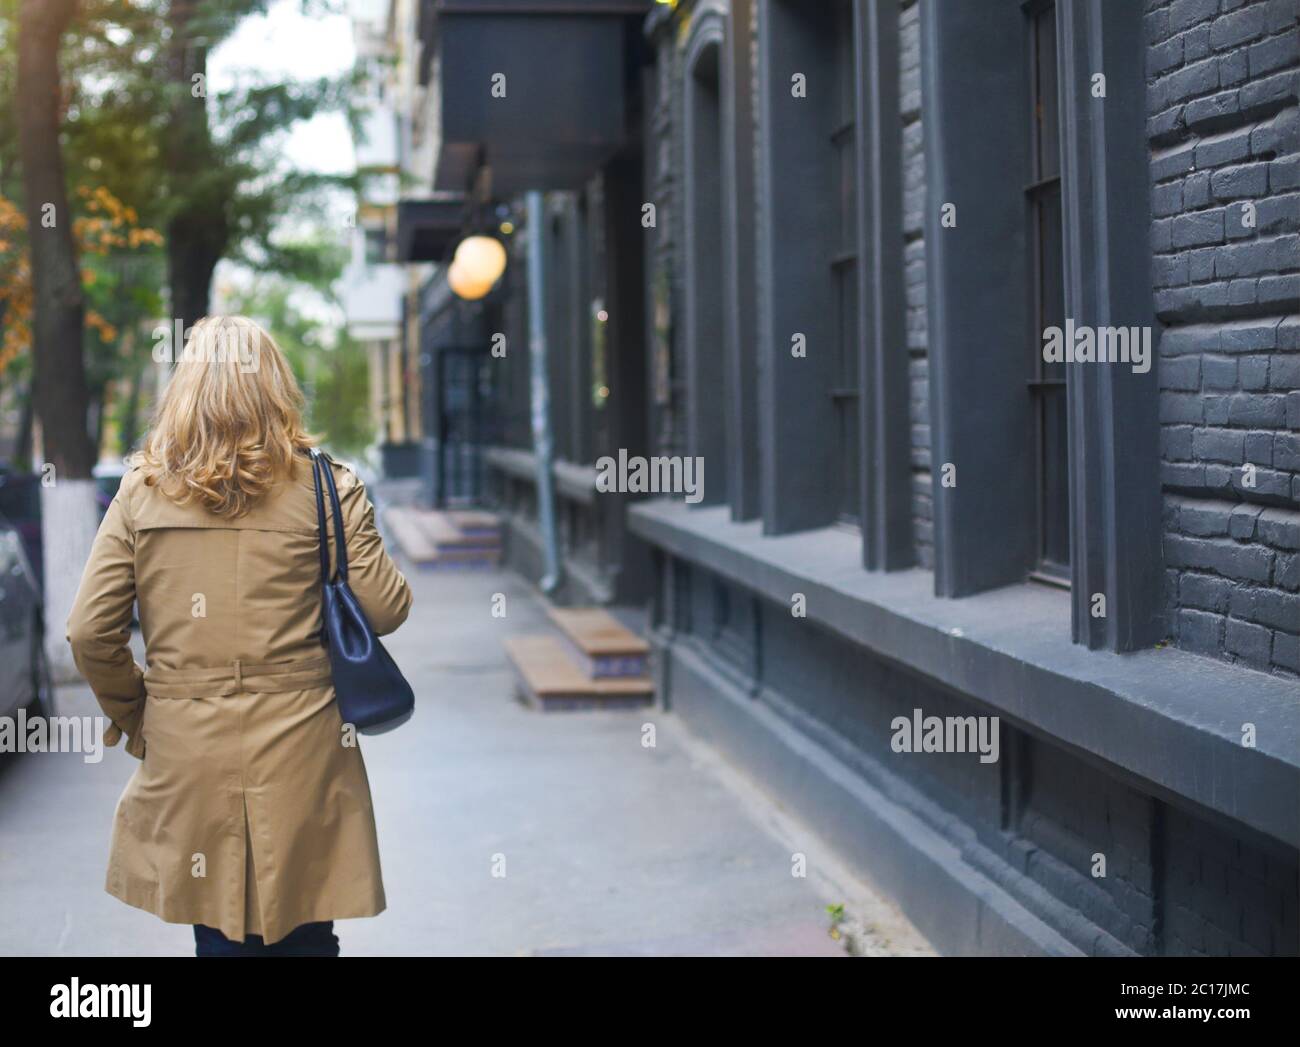 Middle age women goes through the city and smiles. Loneliness concept. Stock Photo